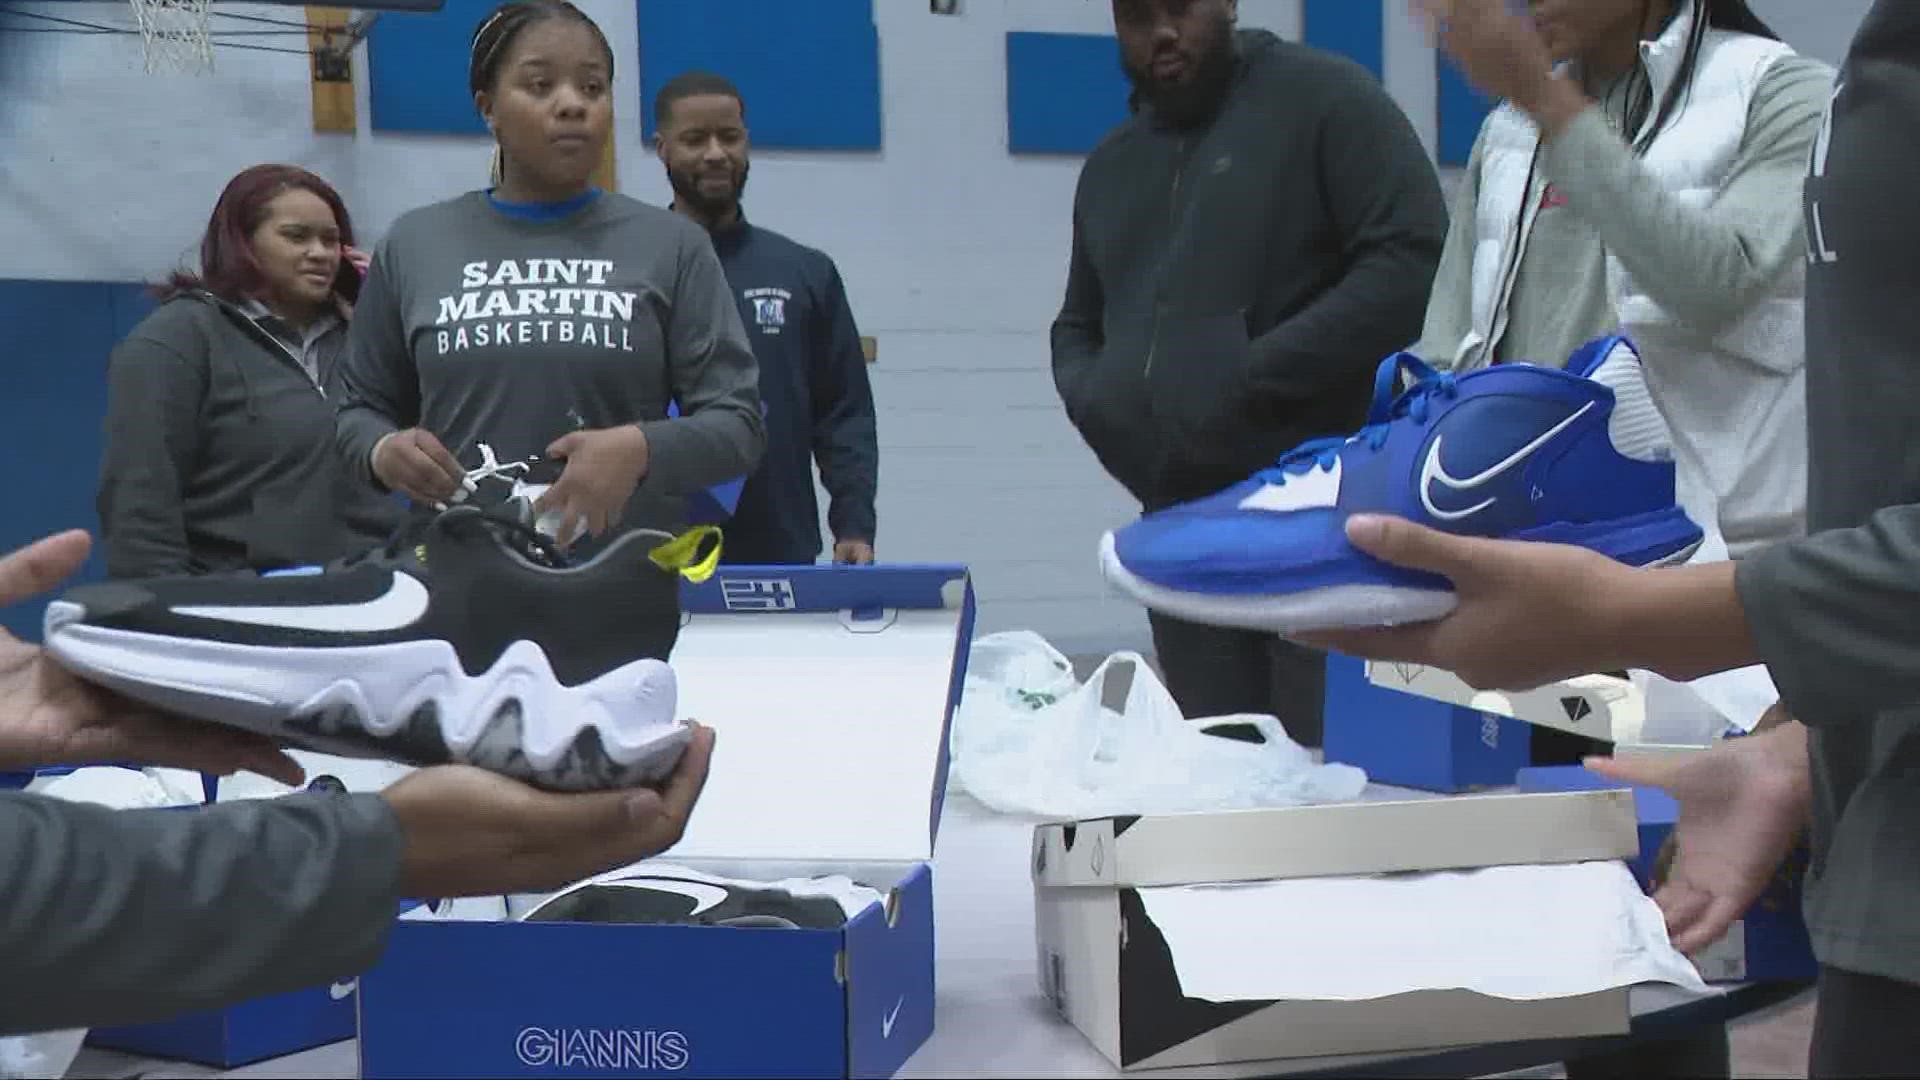 Cleveland native and WNBA star Naz Hillmon visited Northeast Ohio on Thursday to give brand new shoes to the St. Martin de Porres High School girl's basketball team.